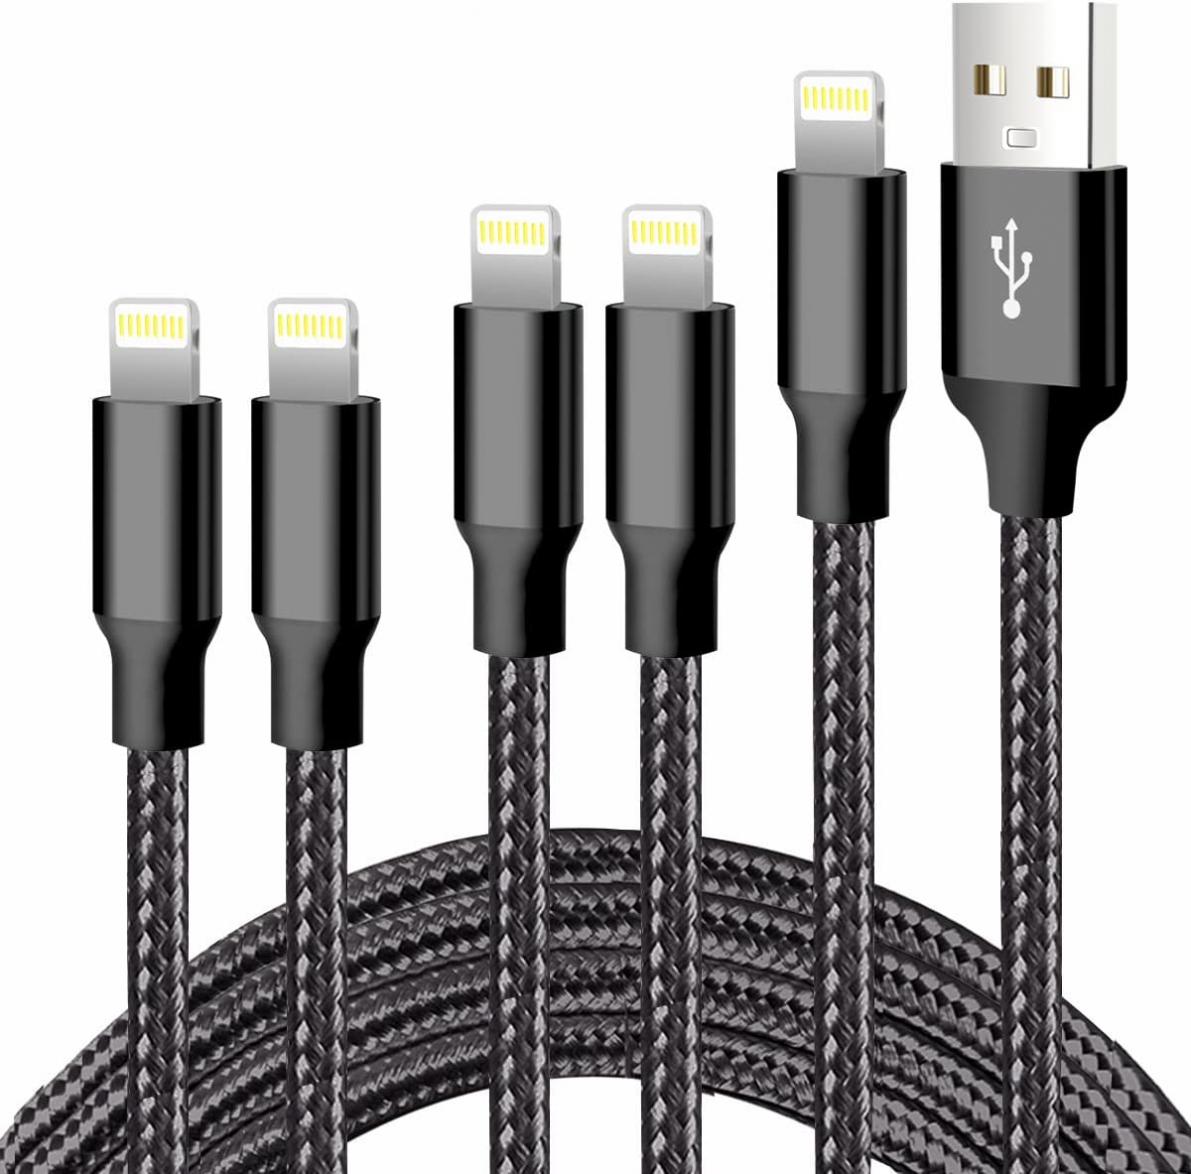 CUGUNU iPhone Charger, 5 Pack 3/3/6/6/10FT Apple MFi Certified USB Lightning Cable Nylon Braided Fast Charging Cord Compatible for iPhone 13/12/11/X/Max/8/7/6/6S/5/5S/SE/Plus/iPad - Black